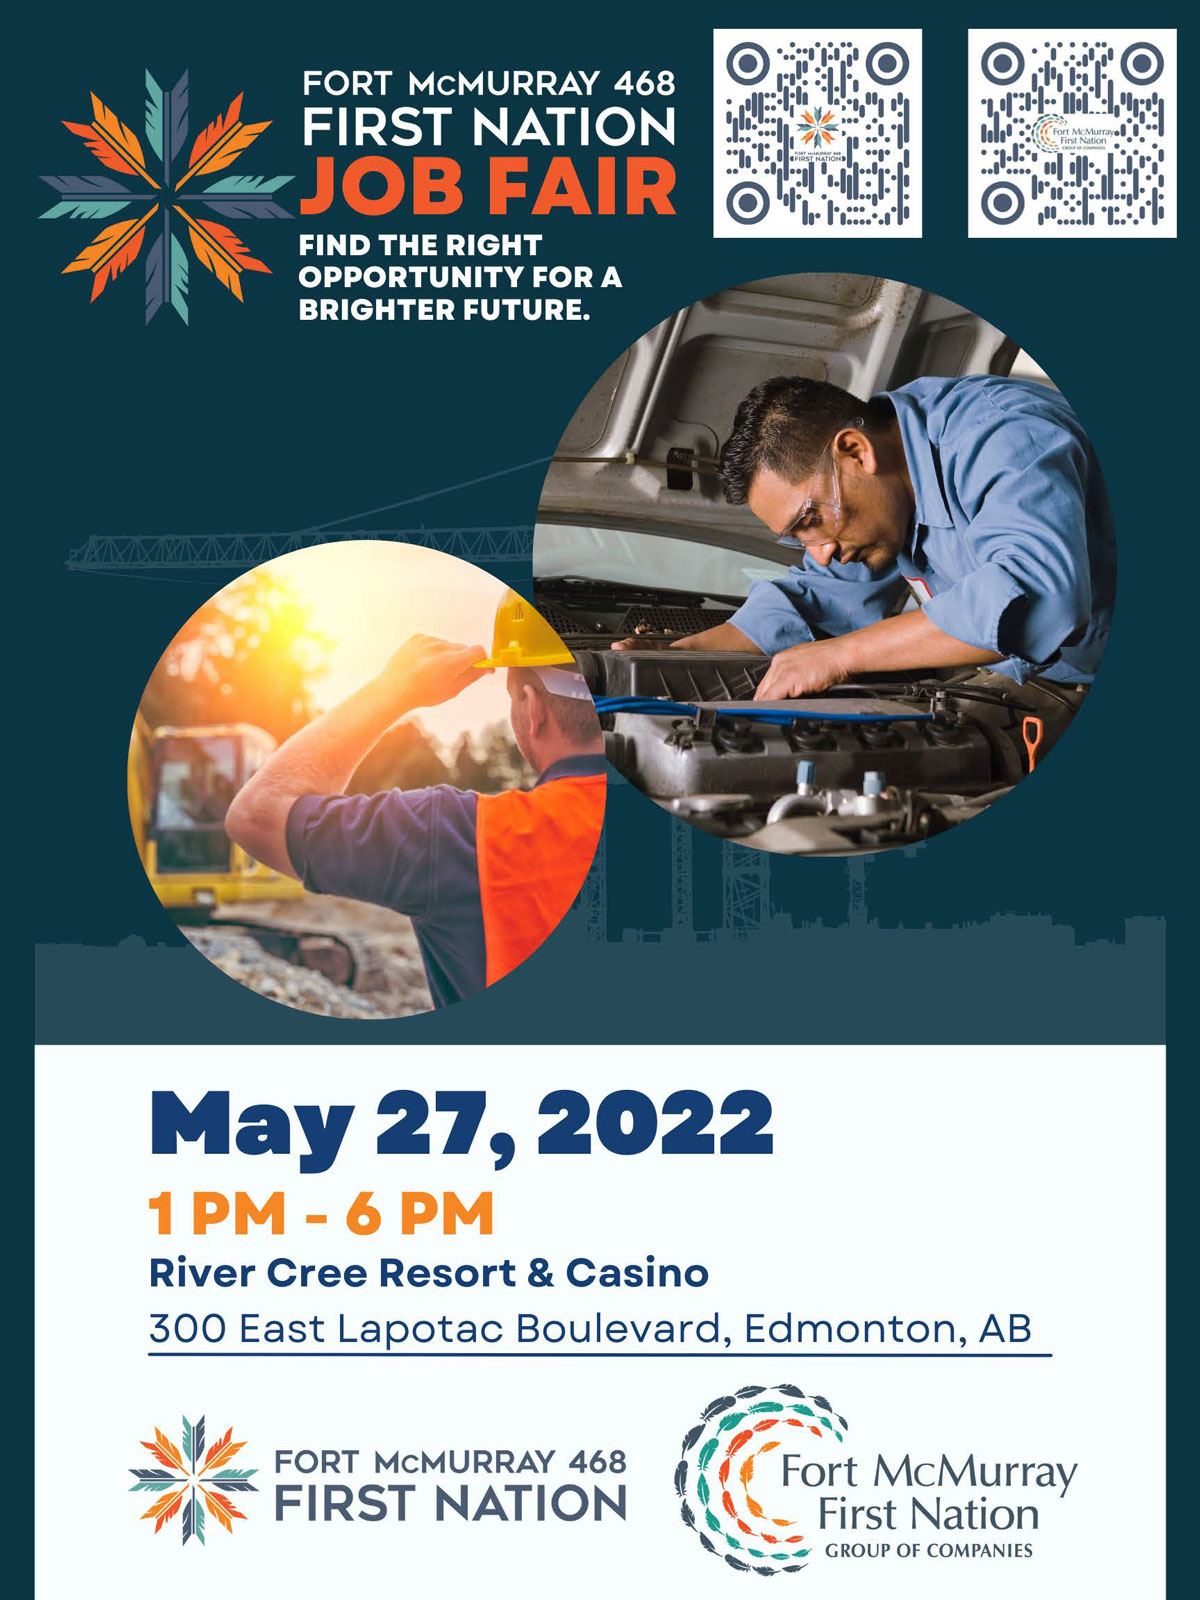 Fort McMurray 468 First Nation Job Fair - Find the Right Opportunity for a Brighter Future. May 27, 2022. 1PM - 6PM. River Cree Resort & Casino. 300 East Lapotac Boulevard, Edmonton, AB.